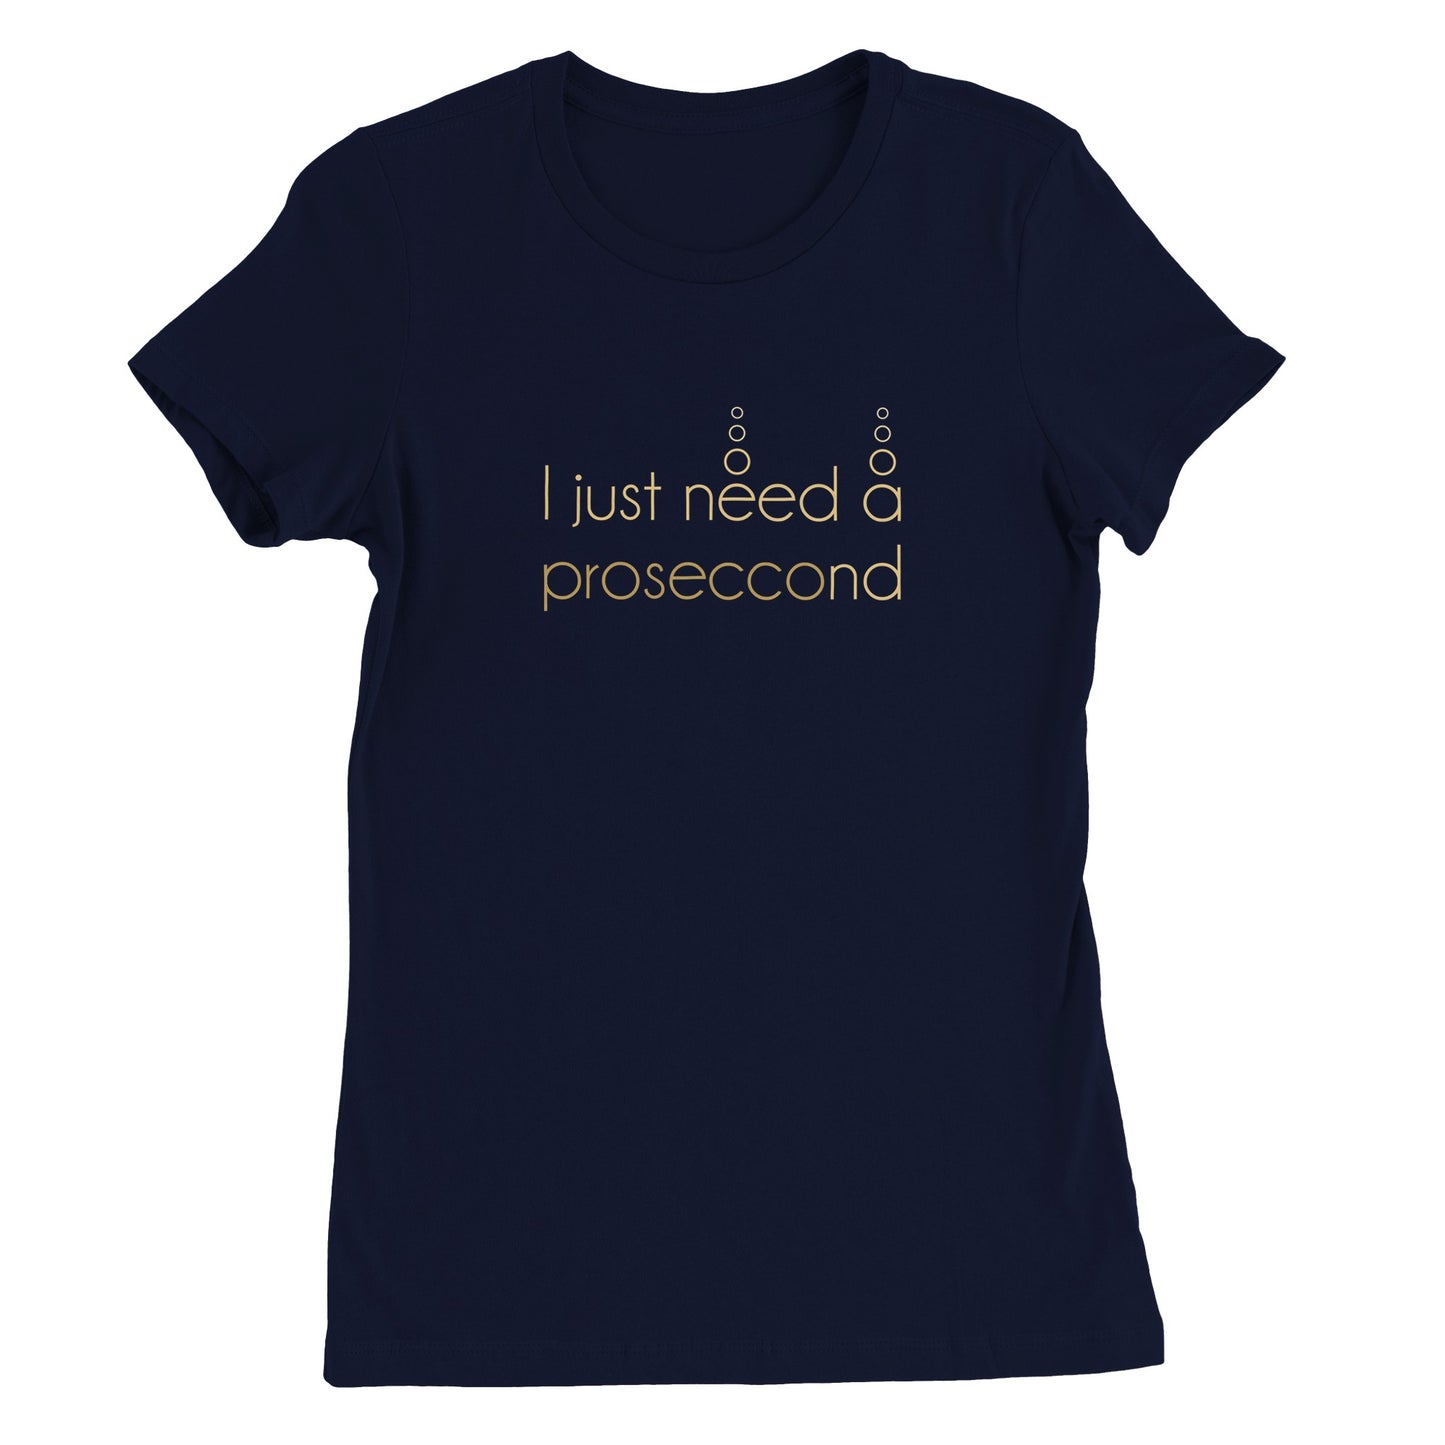 I JUST NEED A PROSECCOND | WOMENS T-SHIRT